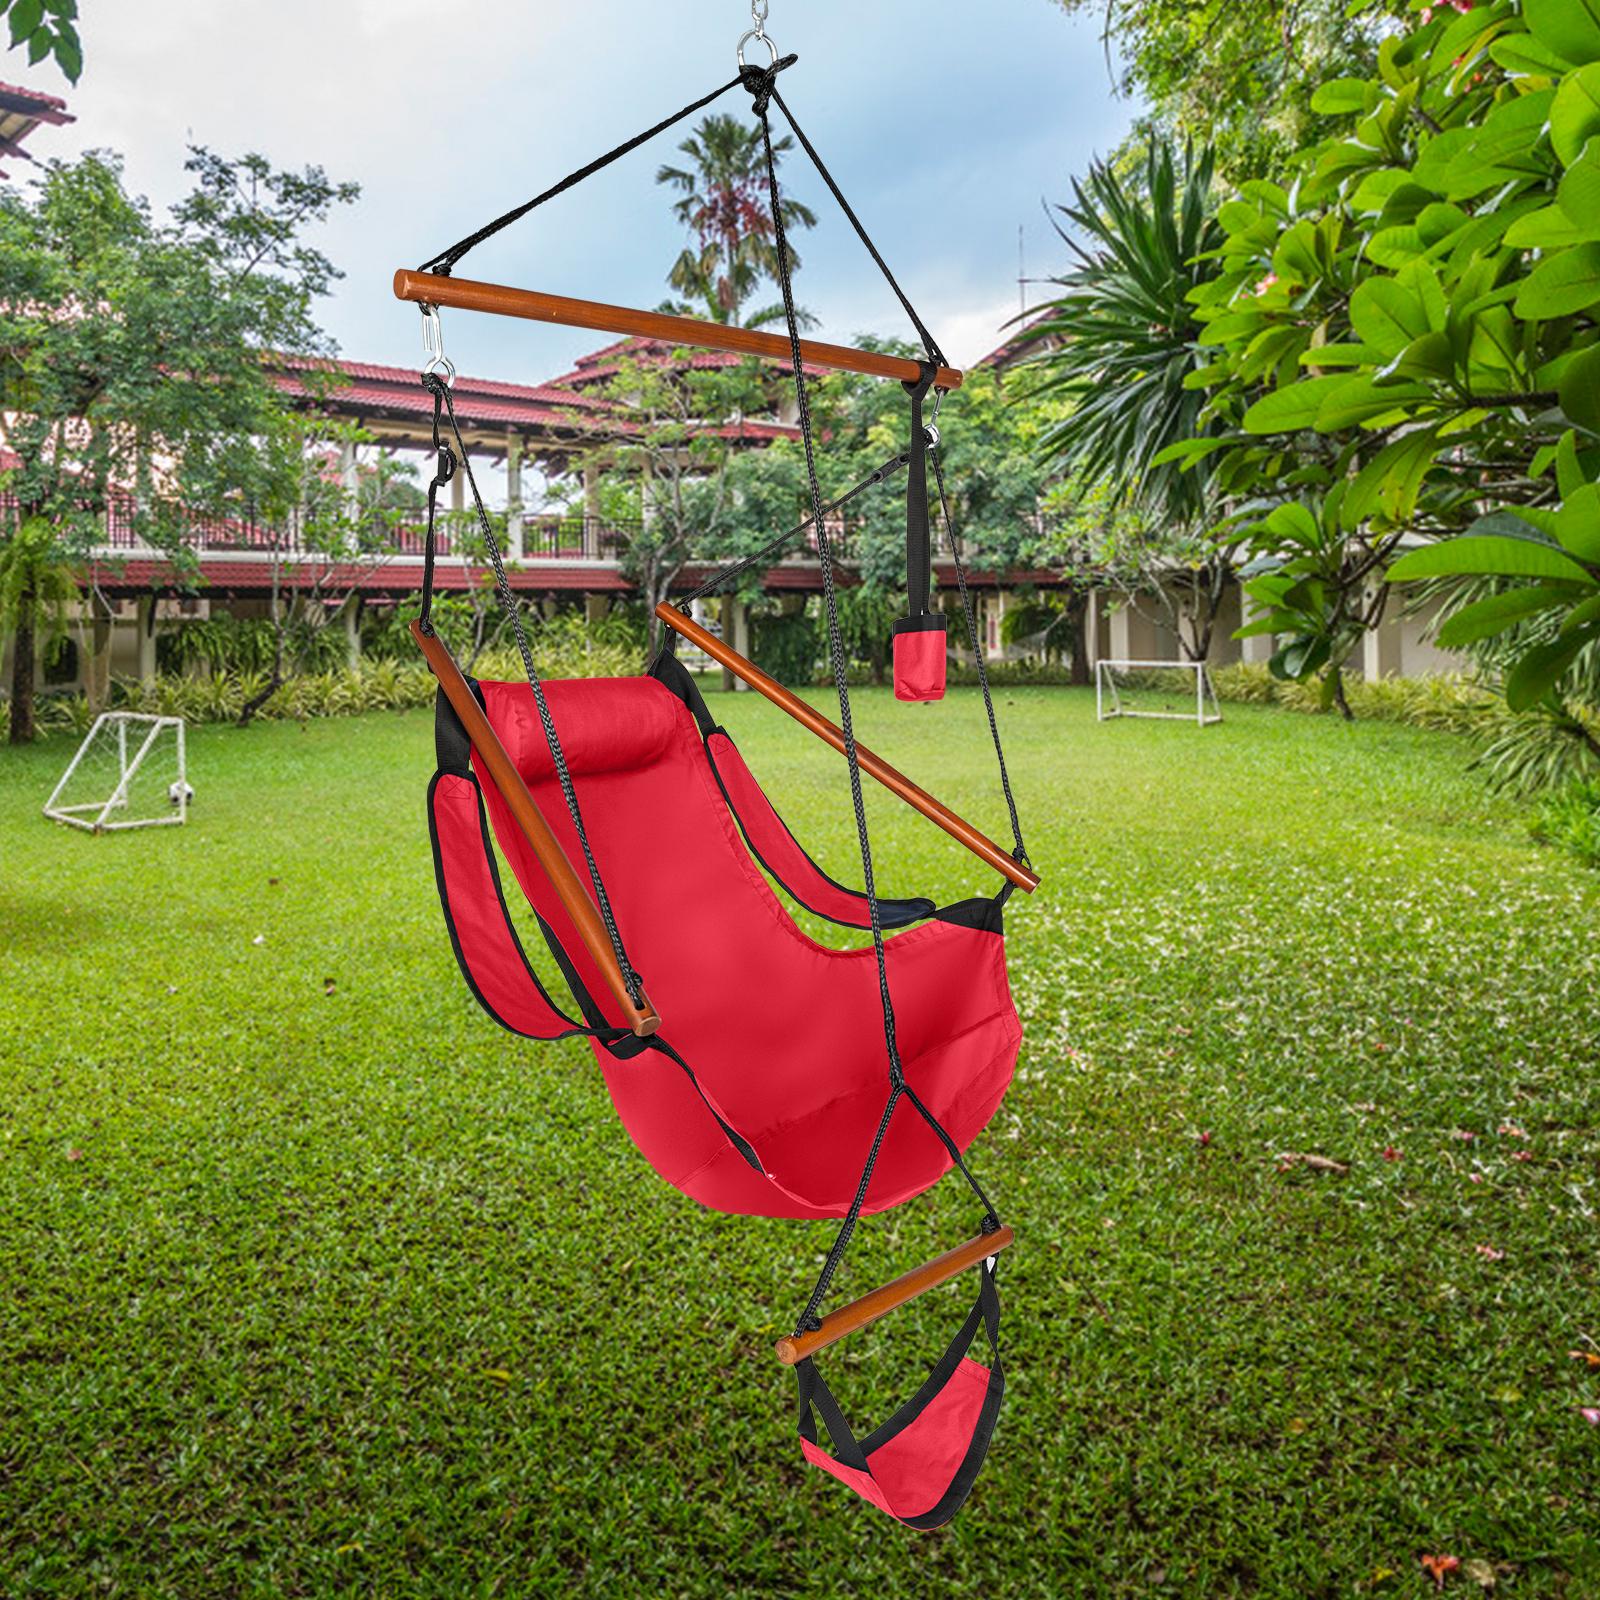 Deluxe Air Hammock Hanging Patio Tree Sky Swing Chair Outdoor Porch Lounge, Stable and Strong Rope Chair Porch Swing Seating - image 1 of 9